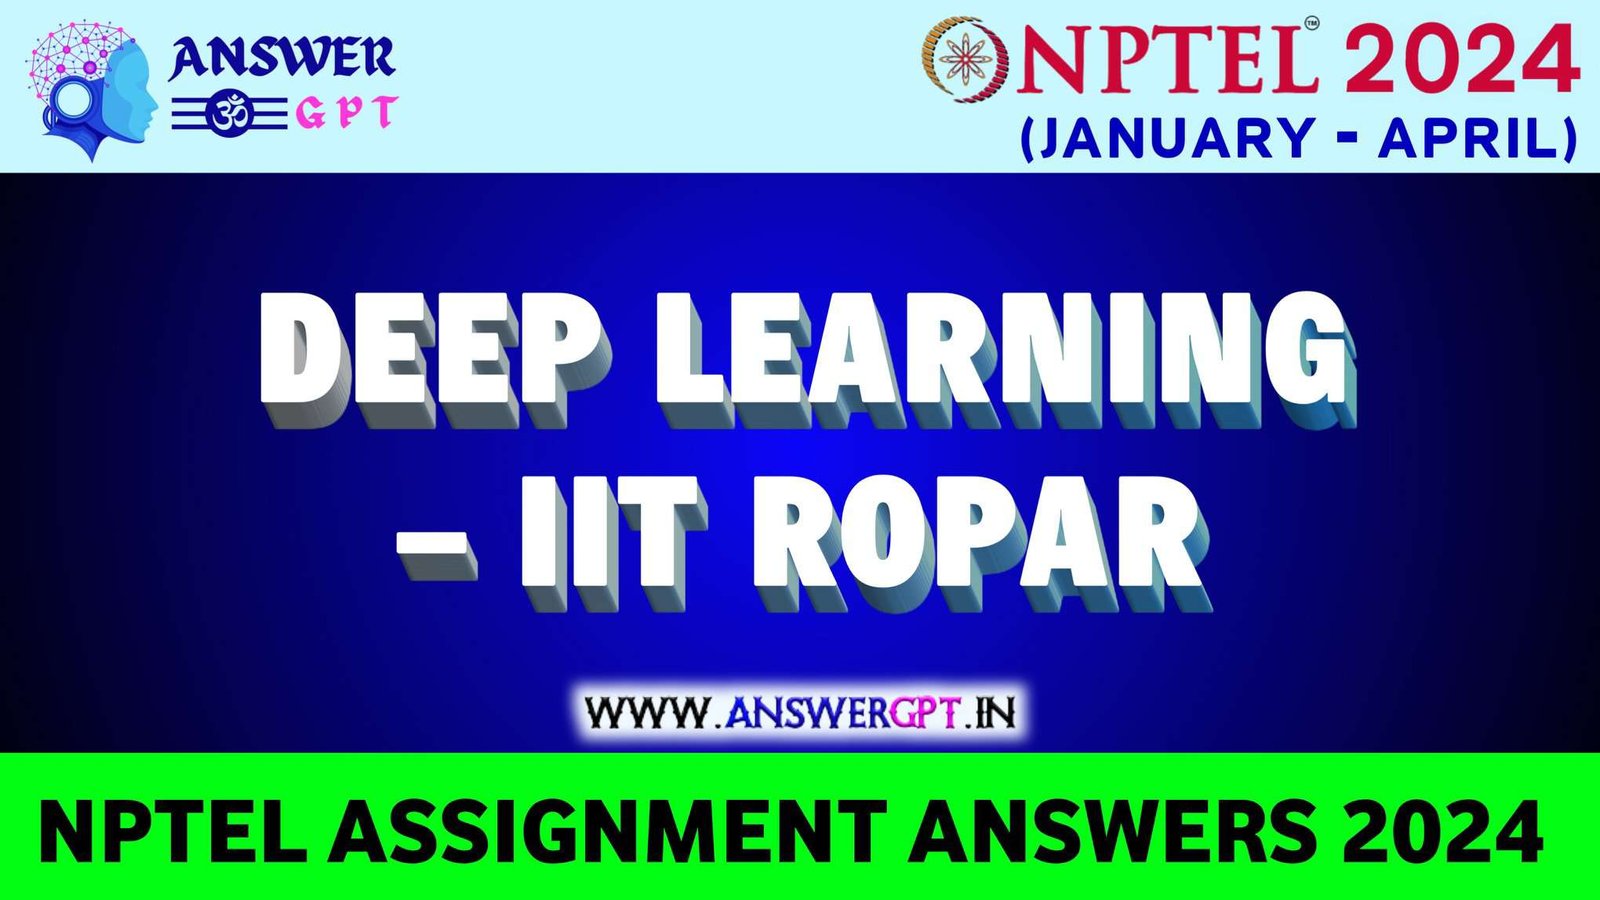 nptel deep learning iit ropar assignment answers week 2